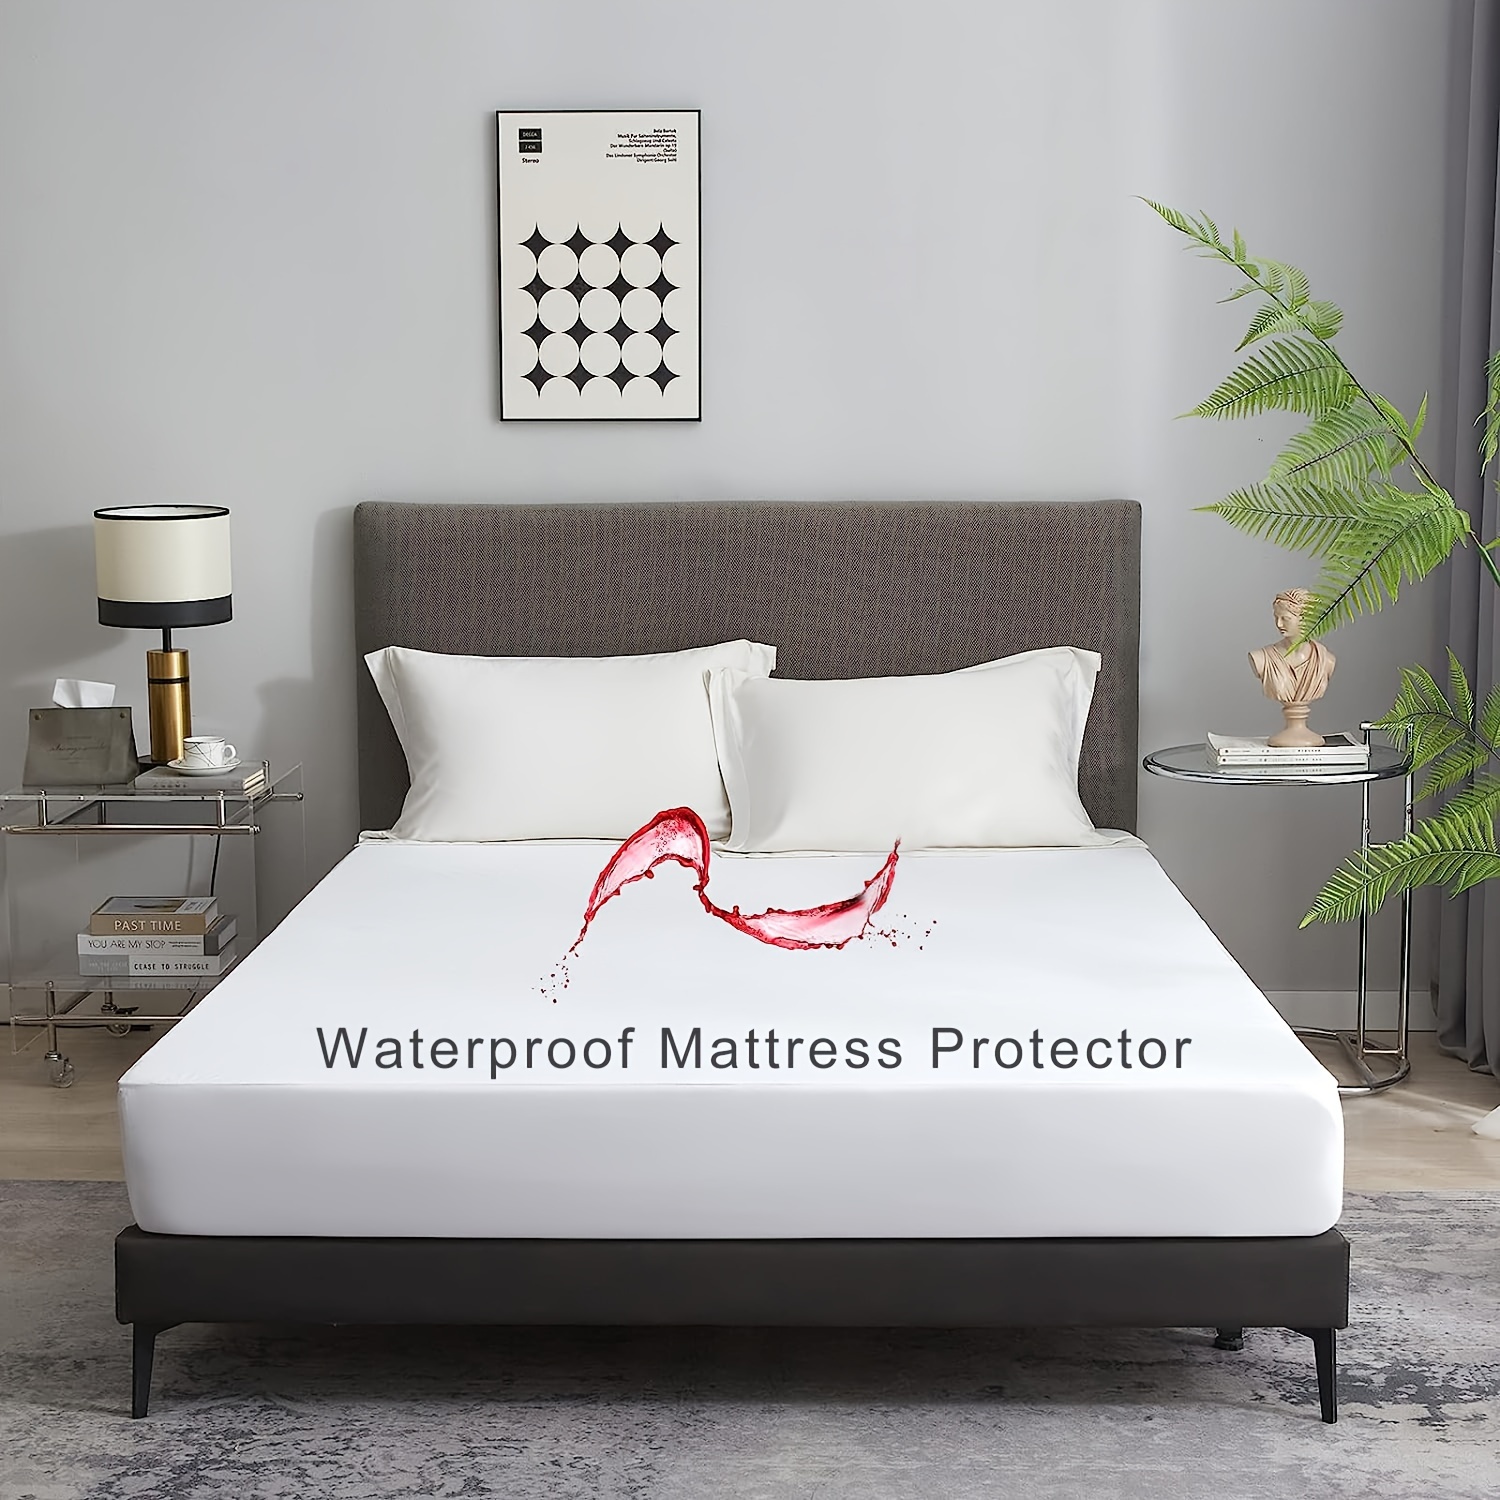 King Size Mattress Cover, Waterproof Breathable Mattress Protector, Premium  Smooth Mattress Cover, Deep Pocket Fit Up to 21 Inches, Soft Washable Bed